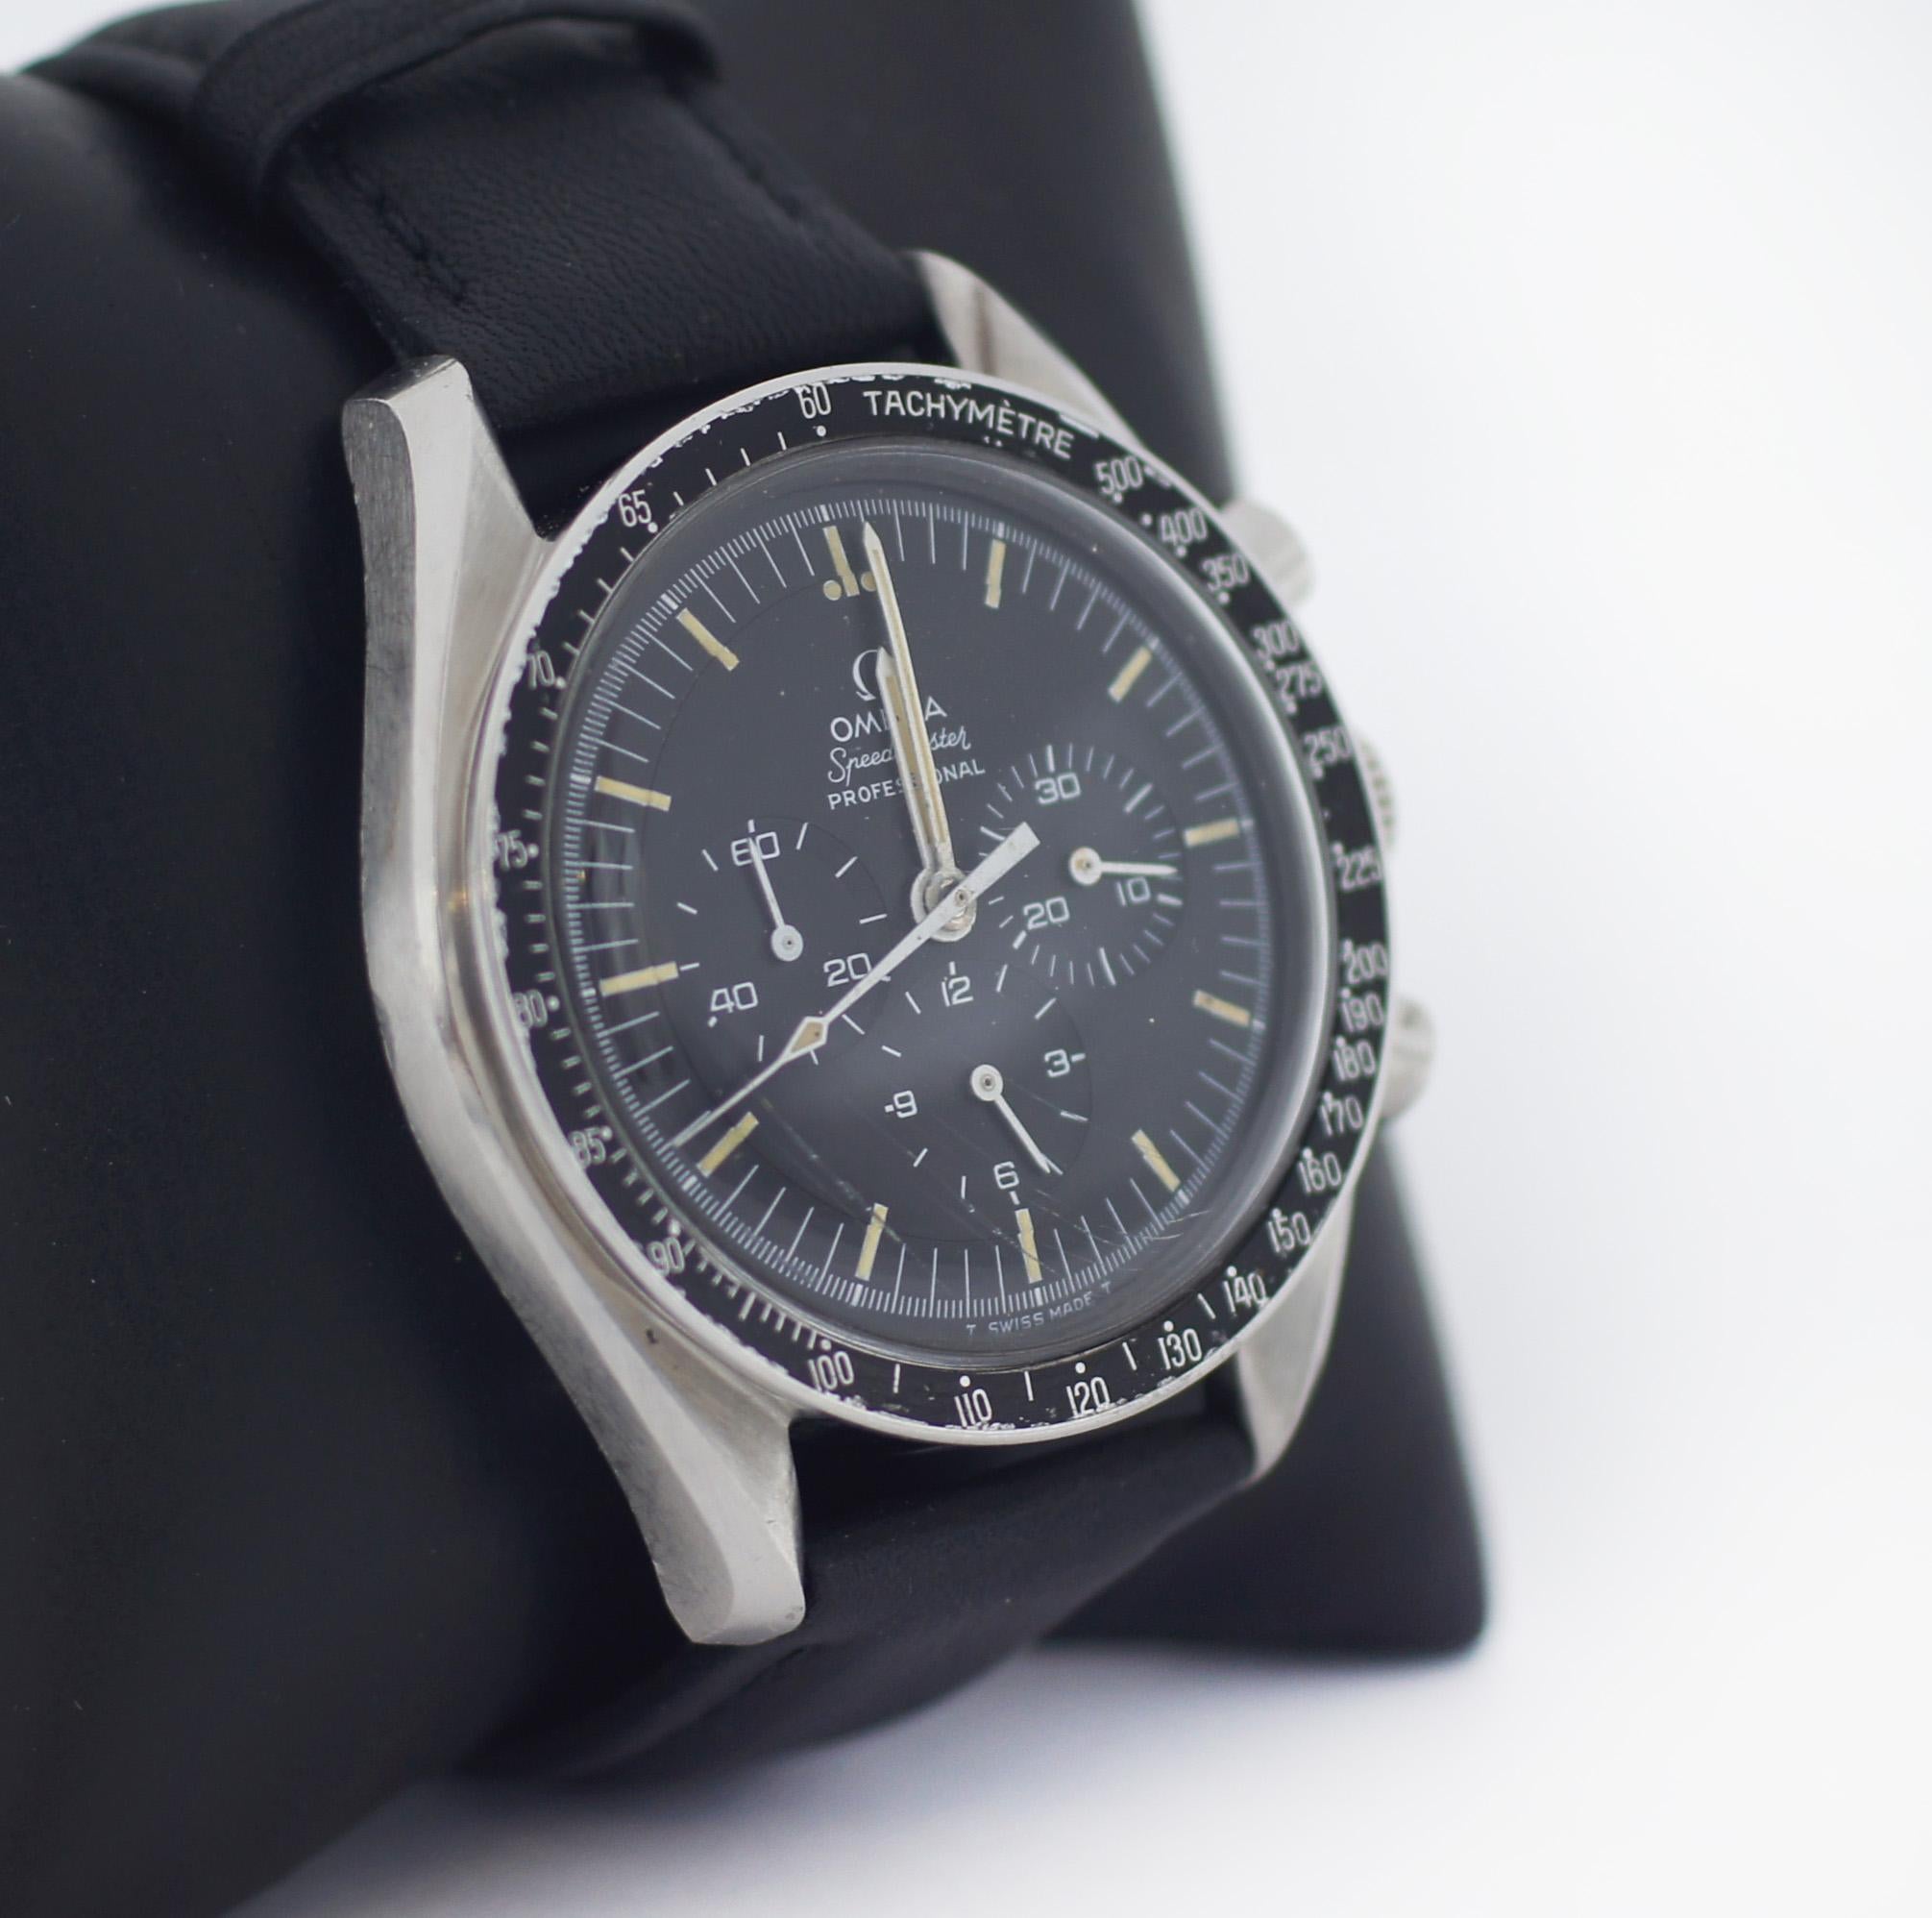 Omega Speedmaster Professional Pre-Moonwatch
It was introduced in 1969 and was in production until around 1971.
145.022-69 is the first steel Speedmaster to get the new dial with the painted Ω and the shortened main markers
MOVEMENT NUMBERS SEEN: